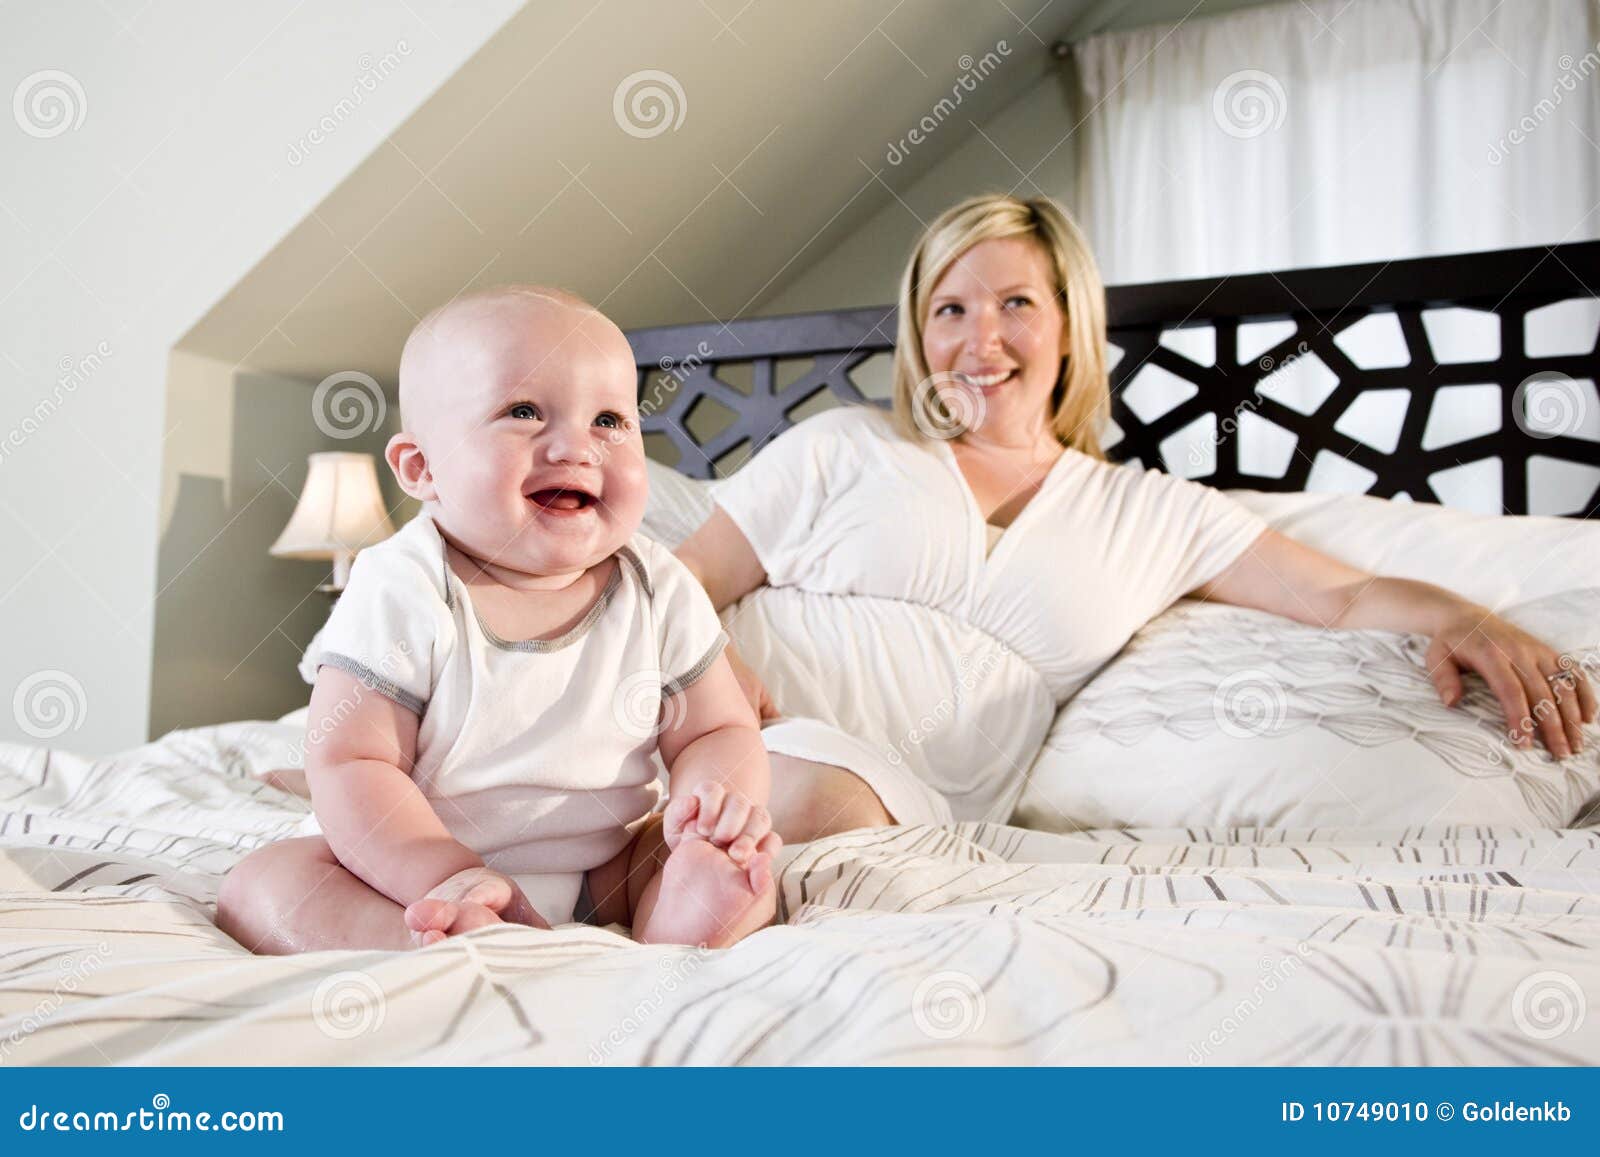 Happy Baby Sitting on Bed with Mother Stock Photo - Image of child ...